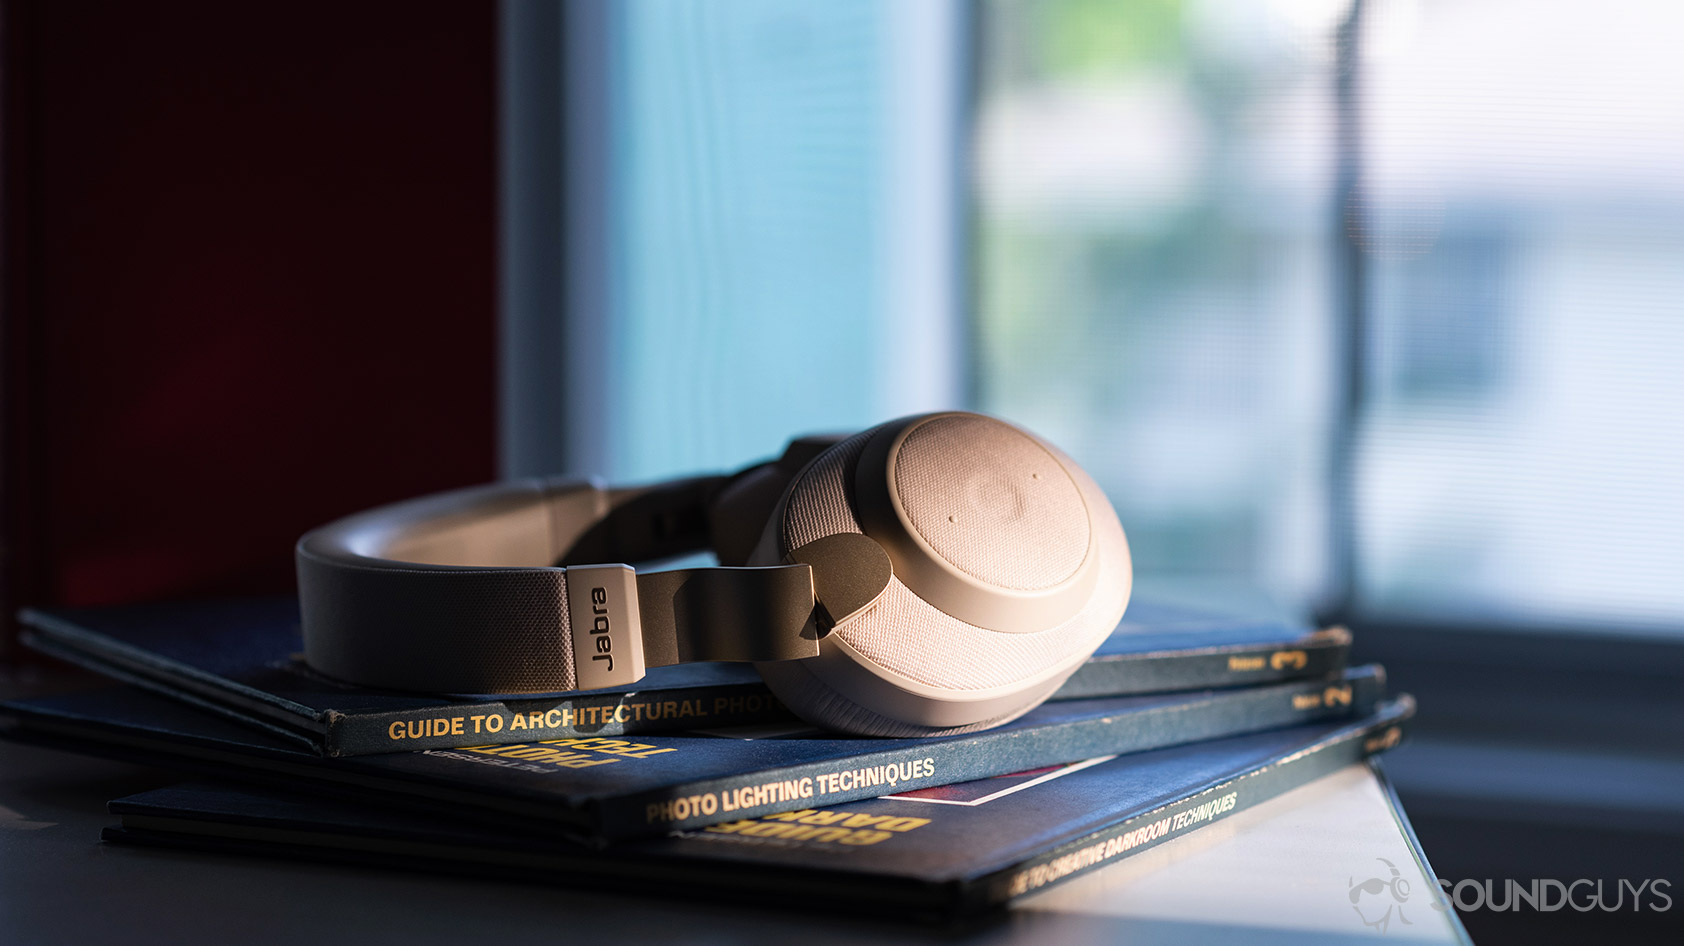 The Jabra Elite 85h headphones in front of a window on a stack of books.